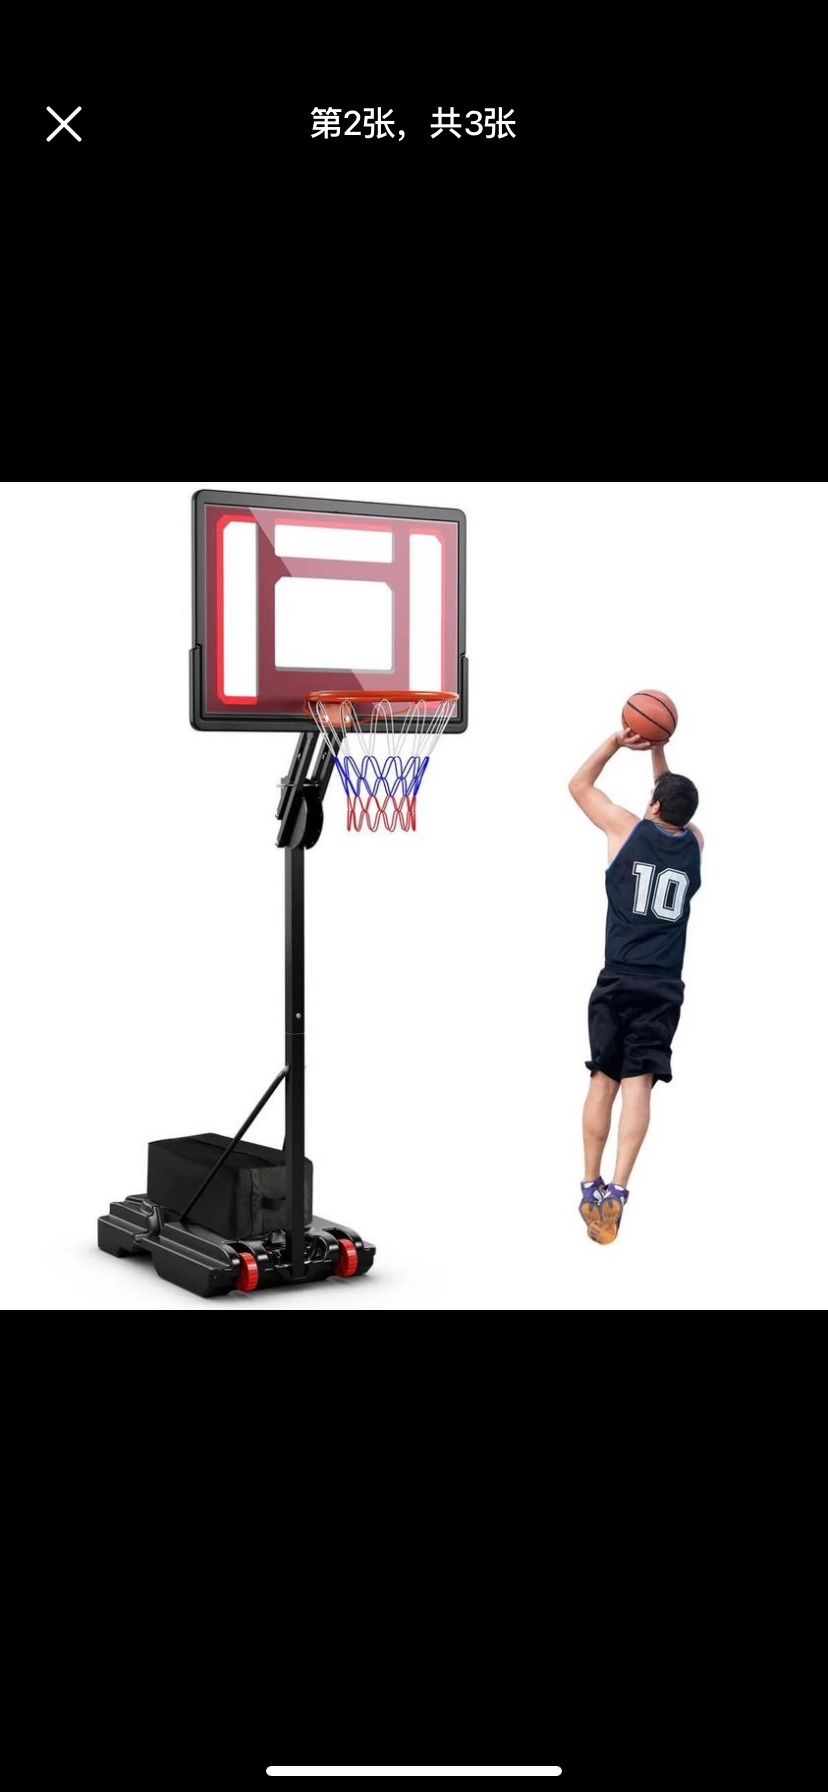 Portable Basketball Hoop System 5-10 FT Adjustable W/Weight Bag 